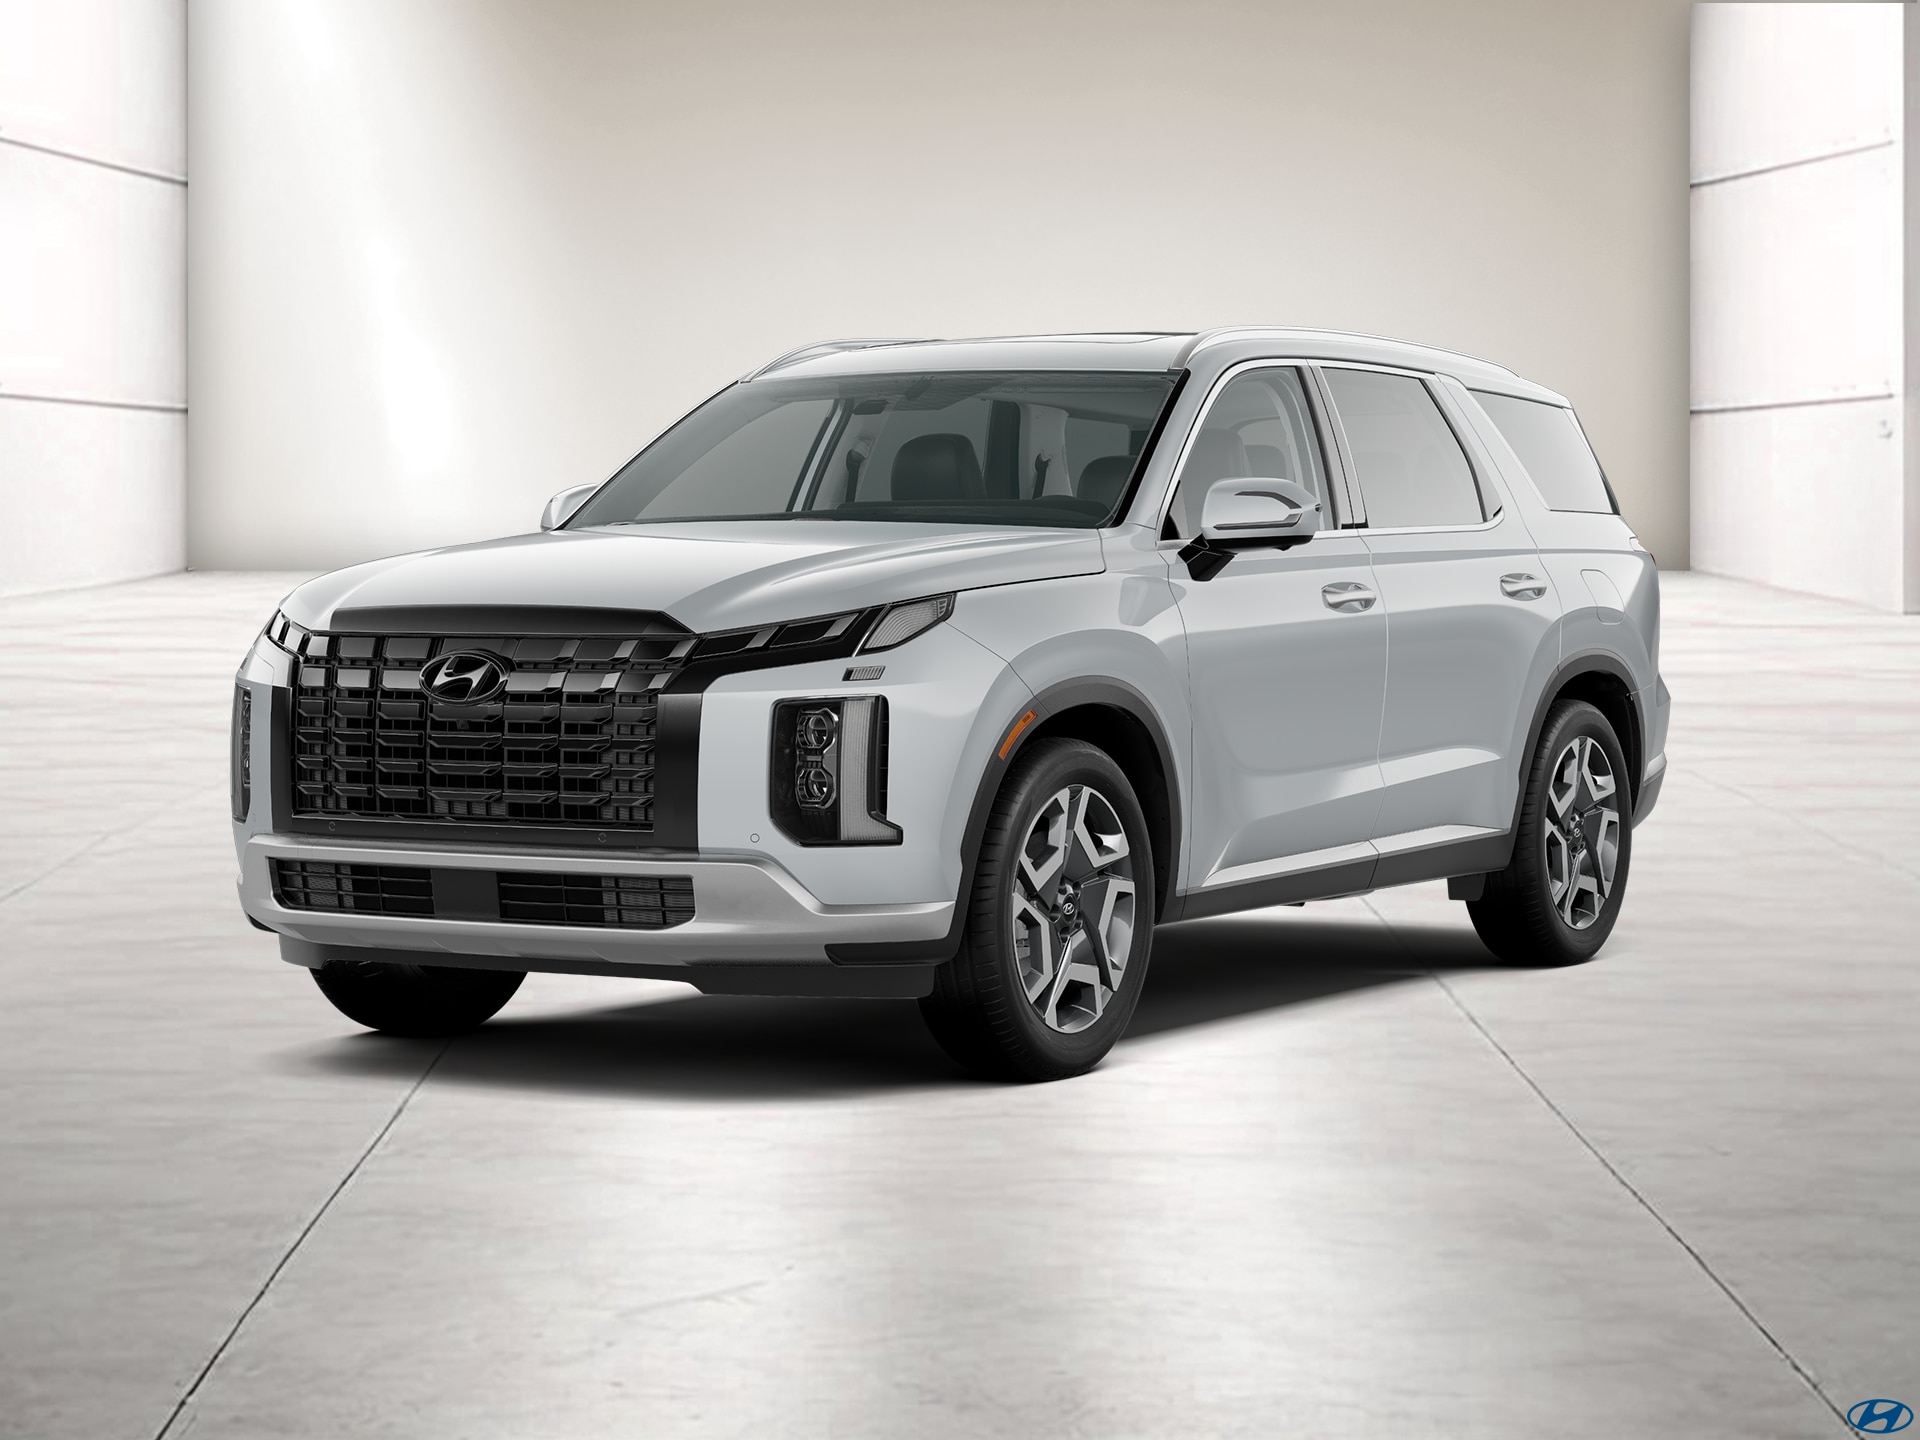 Used Hyundai Palisade in Hyper White For Sale Check Photos, Prices And